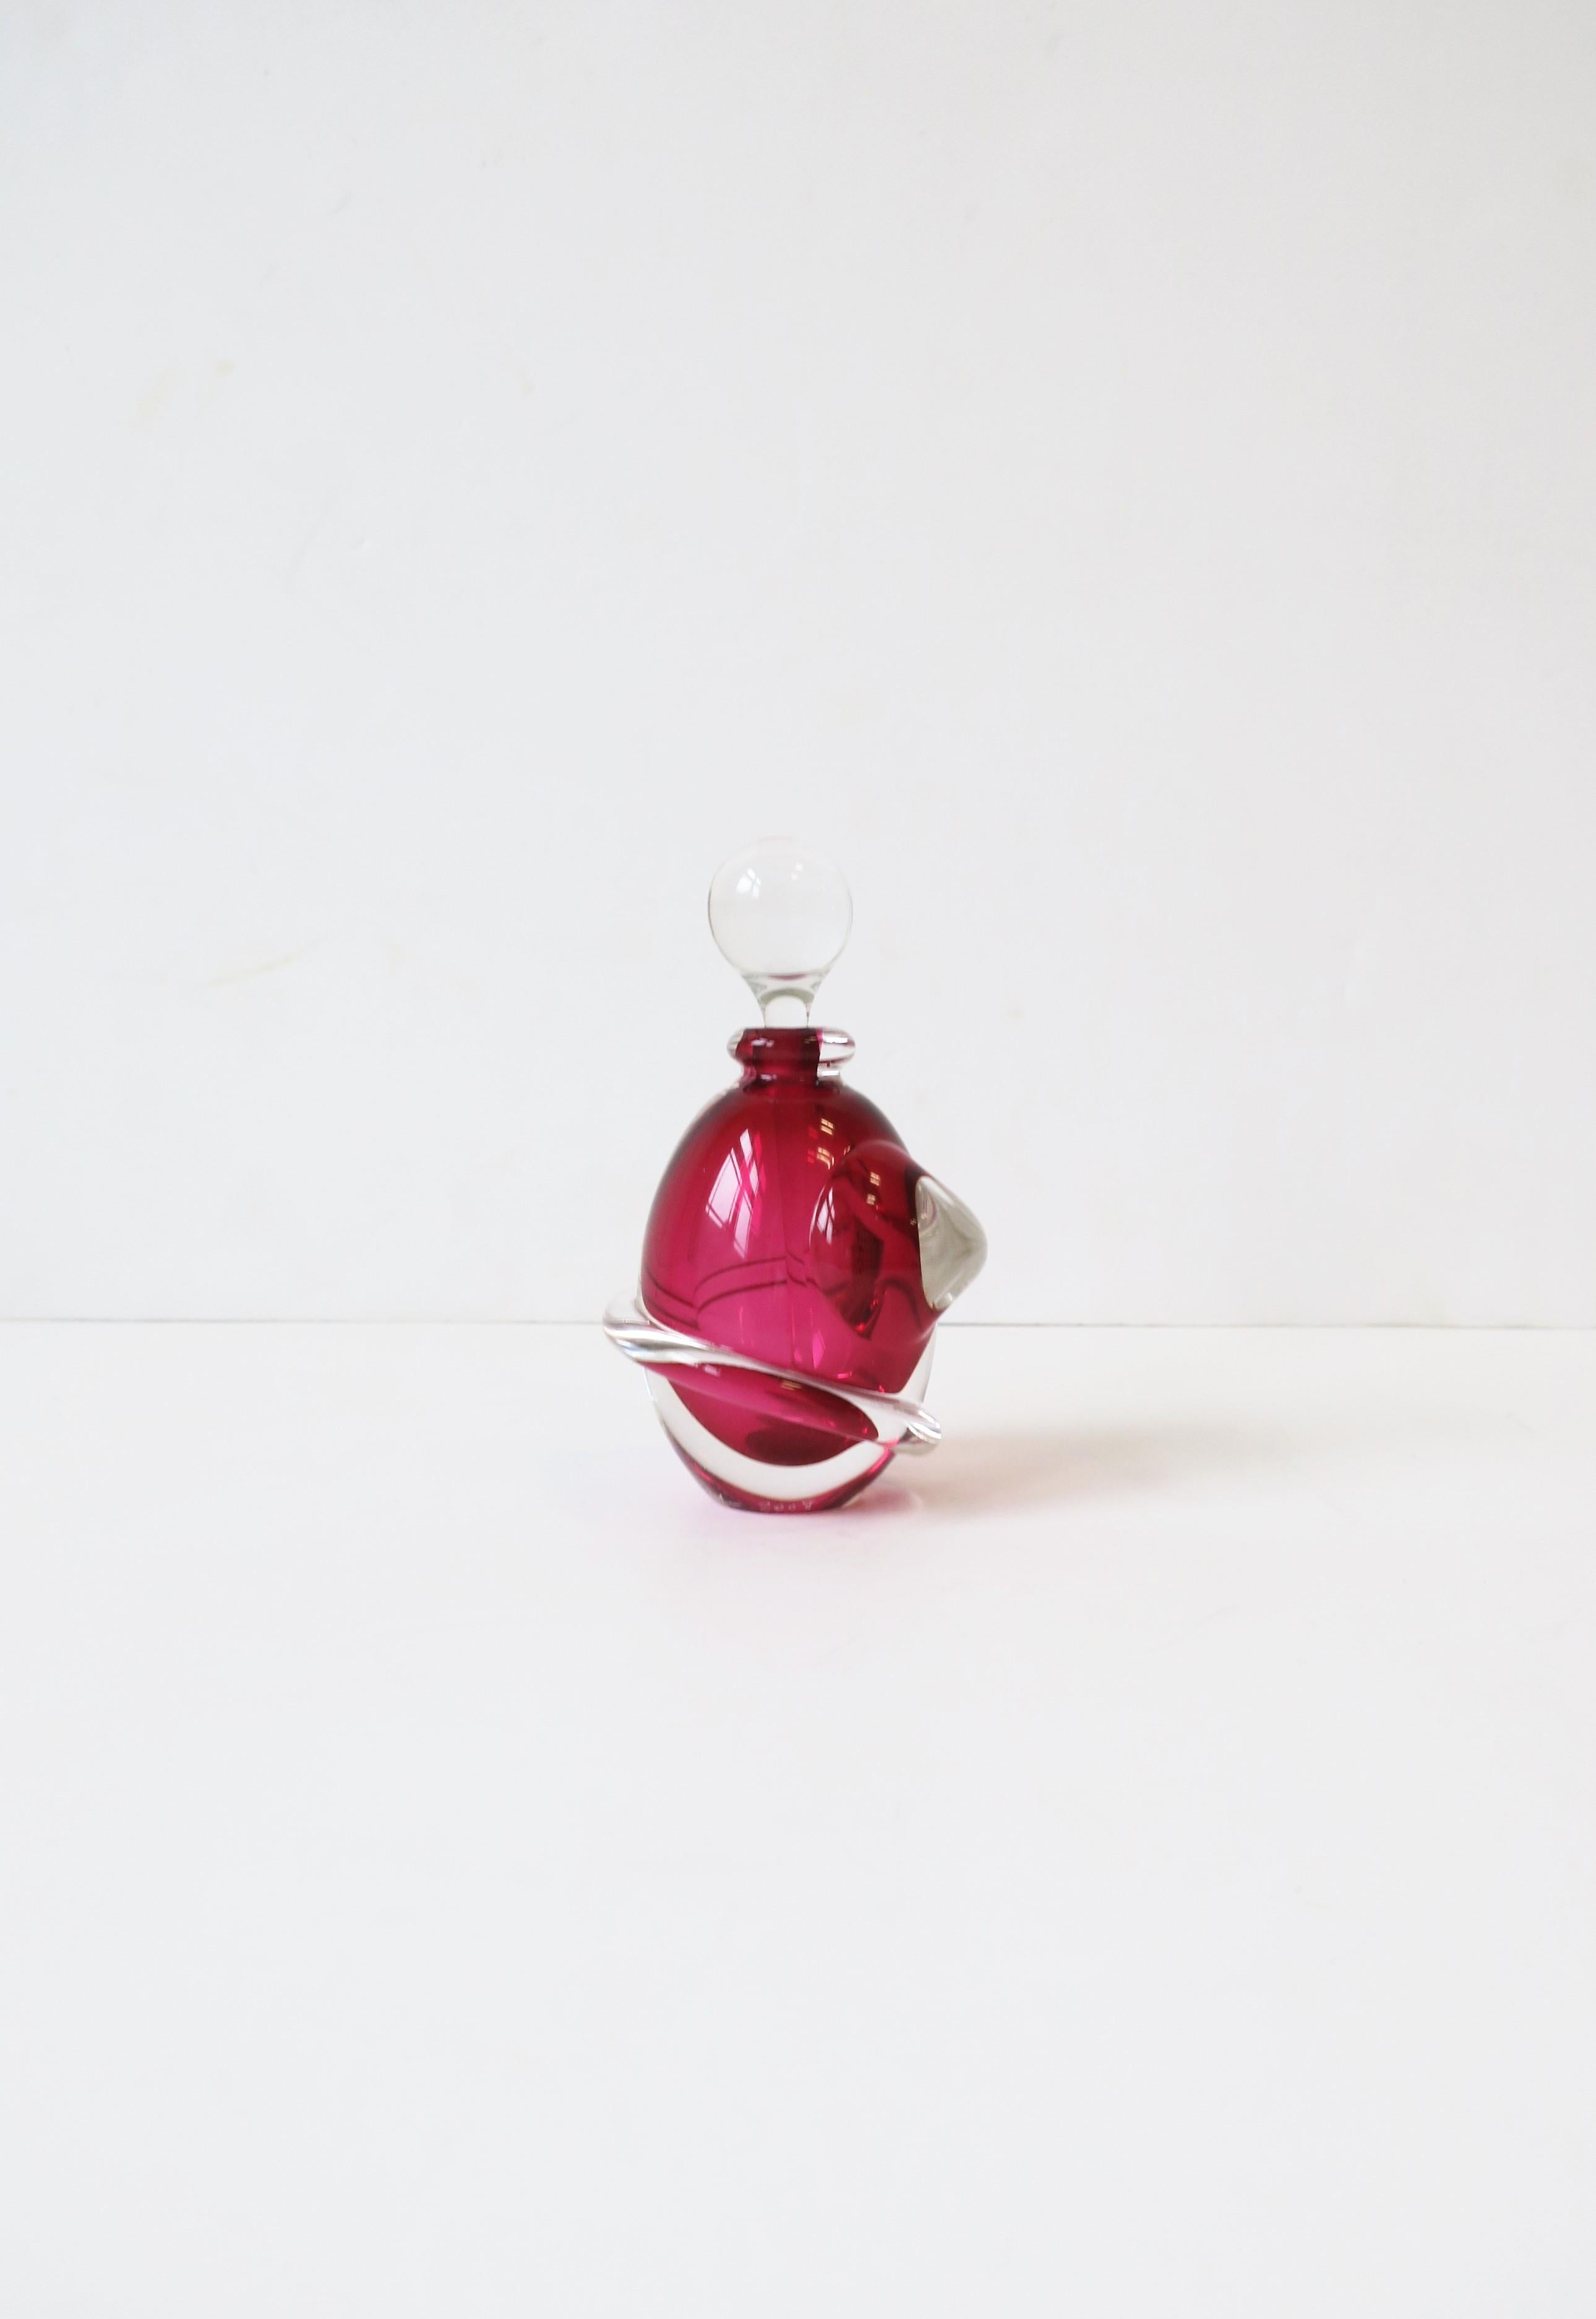 A very beautiful red raspberry art glass perfume vanity bottle signed and dated on bottom, circa early-21st century, 2008. Bottle is red raspberry and clear art glass, oval in shape with clear twisting design around, finished with a clear art glass